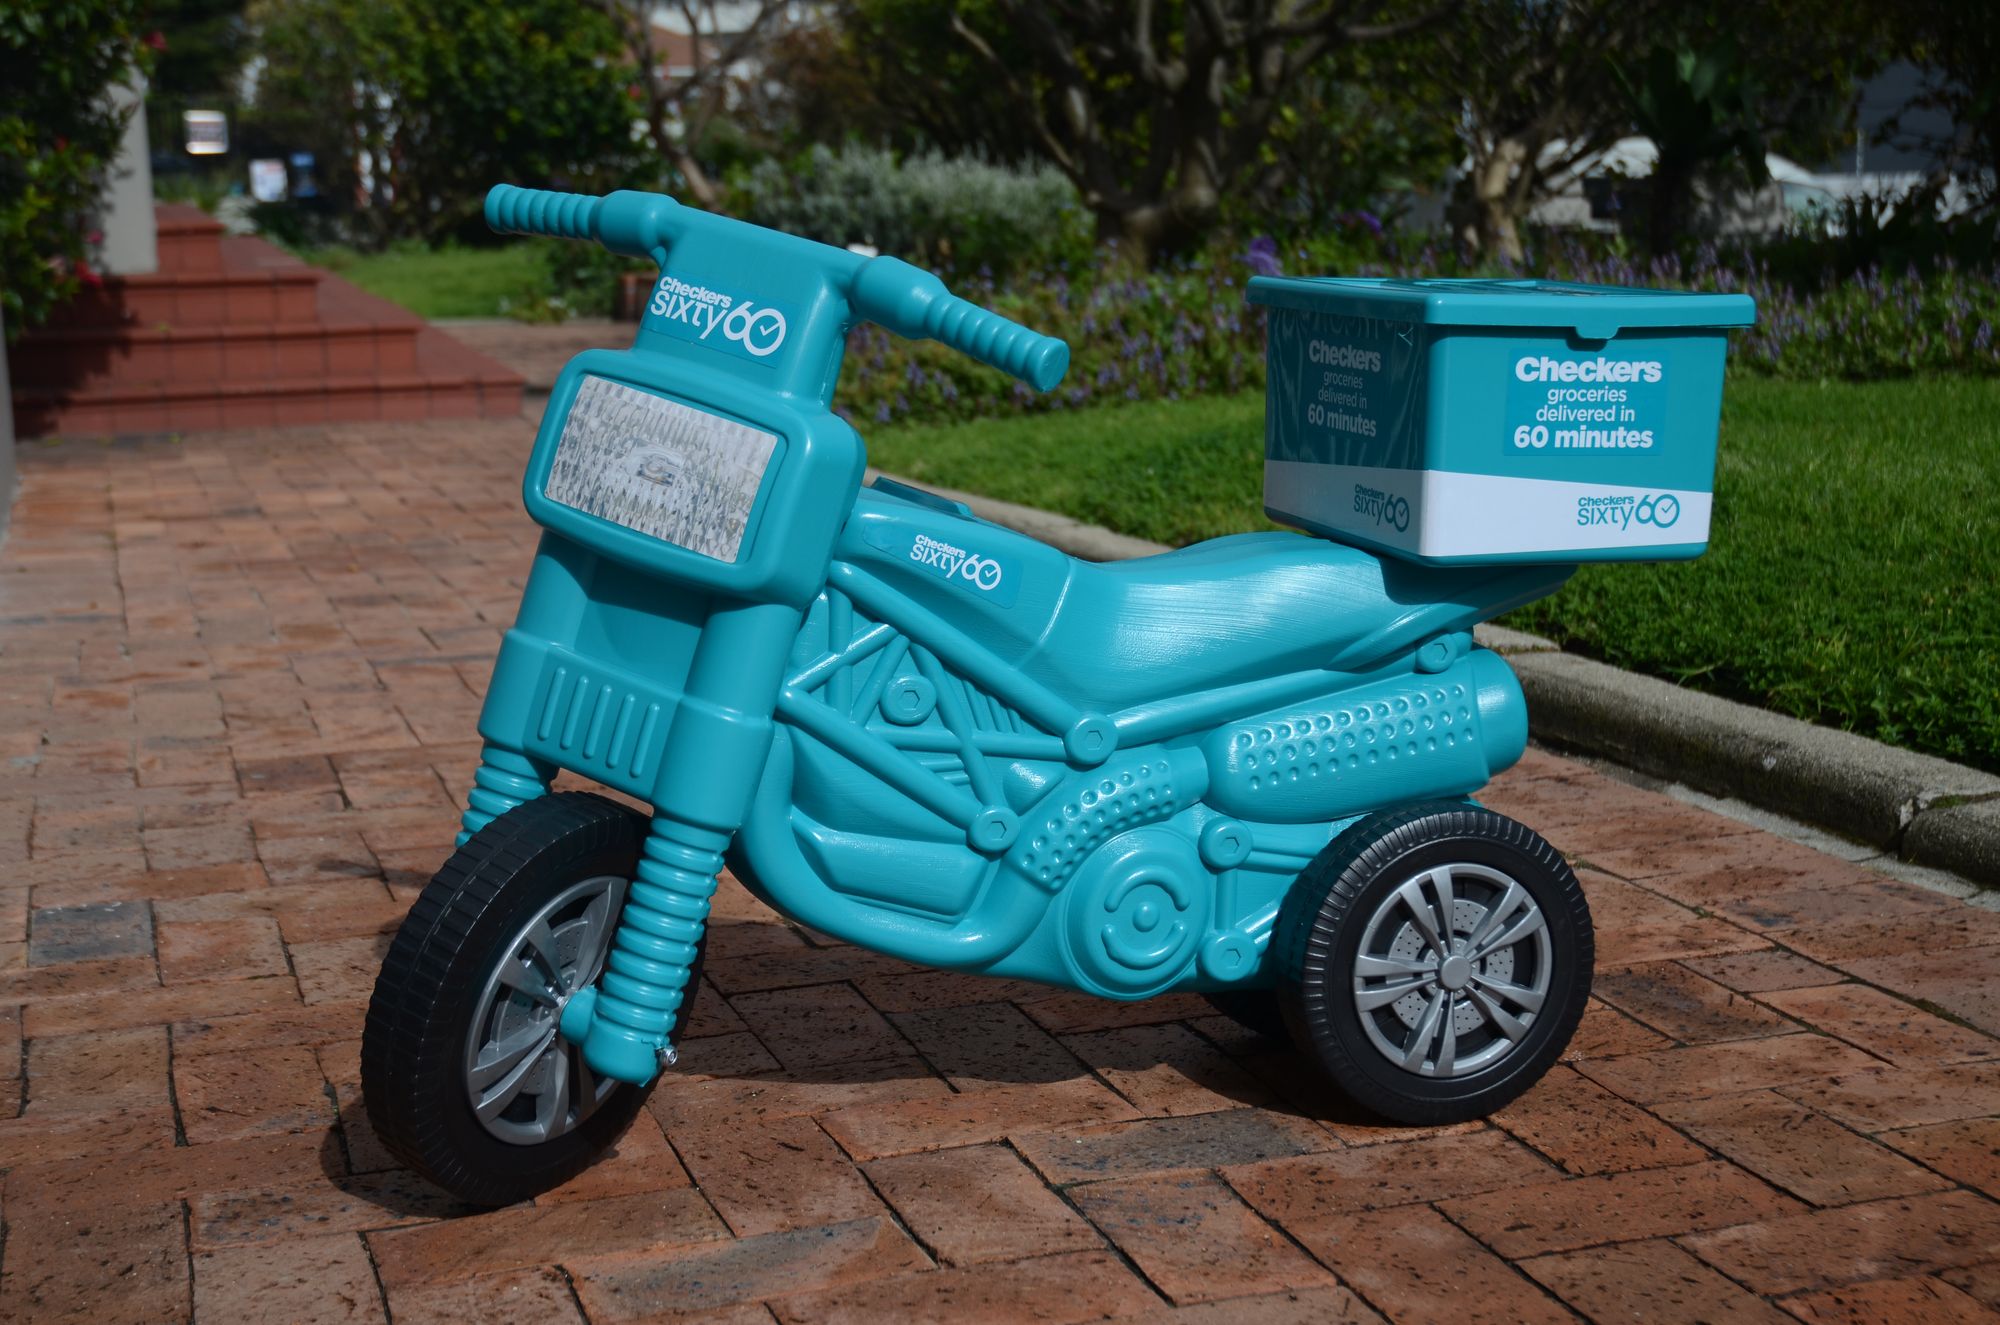 The Checkers Sixty60 delivery bike is smart brand building